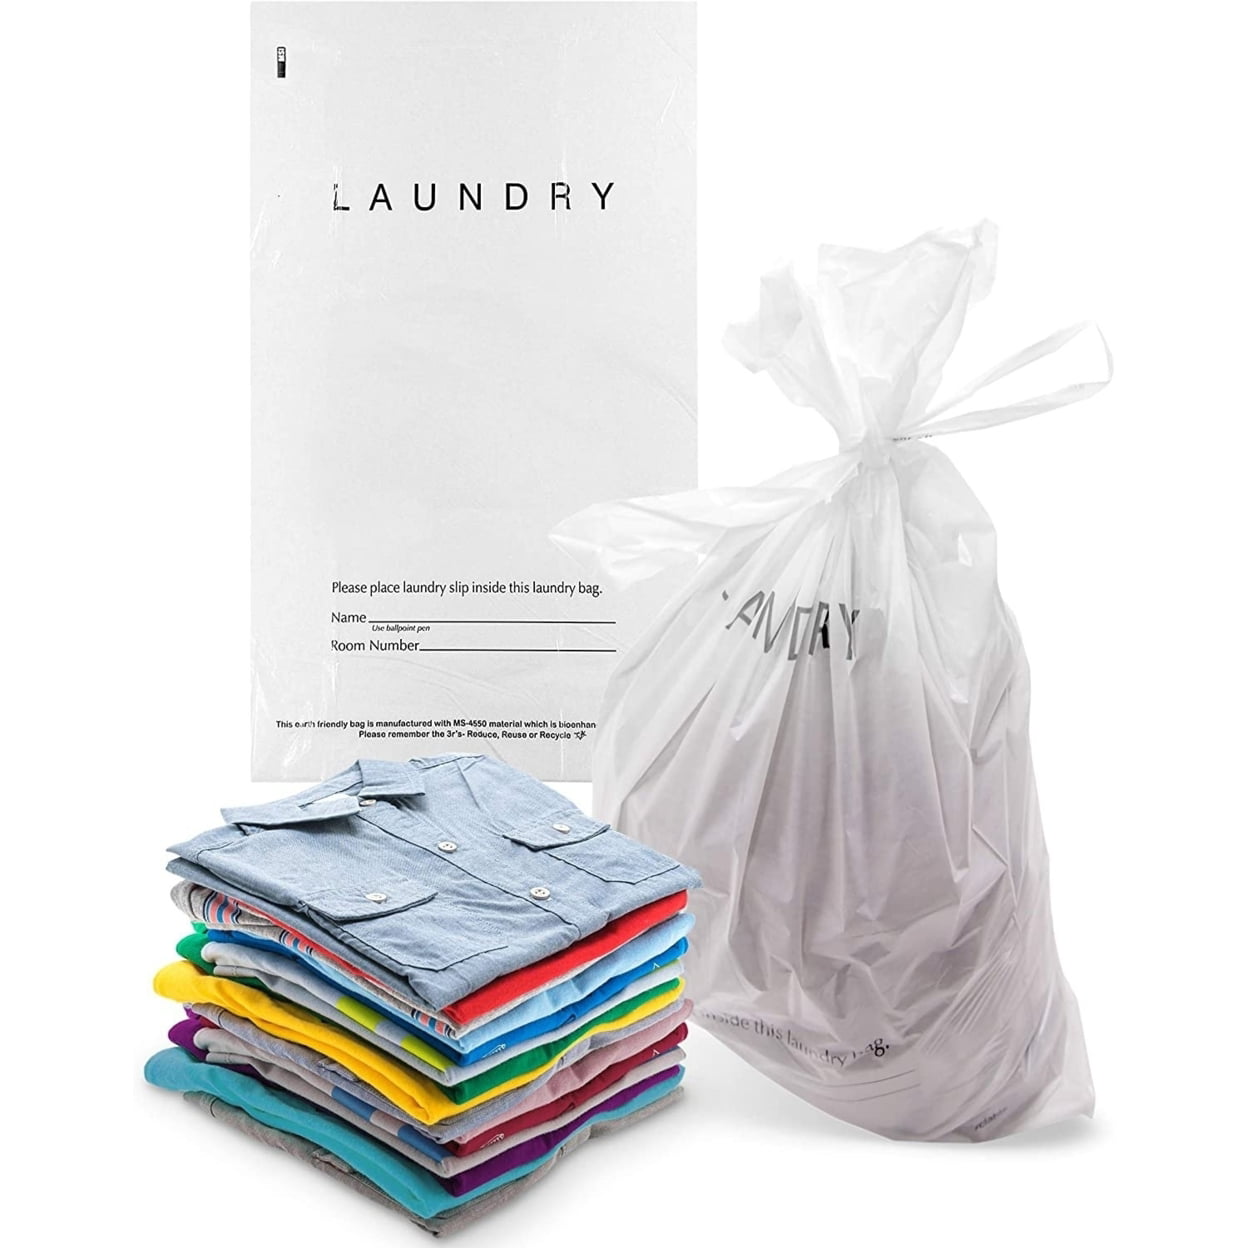 Laundry Bags Hospitality - 14 X 24 Hotel Laundry Bags - Tear Tape Tie  Closure Wh